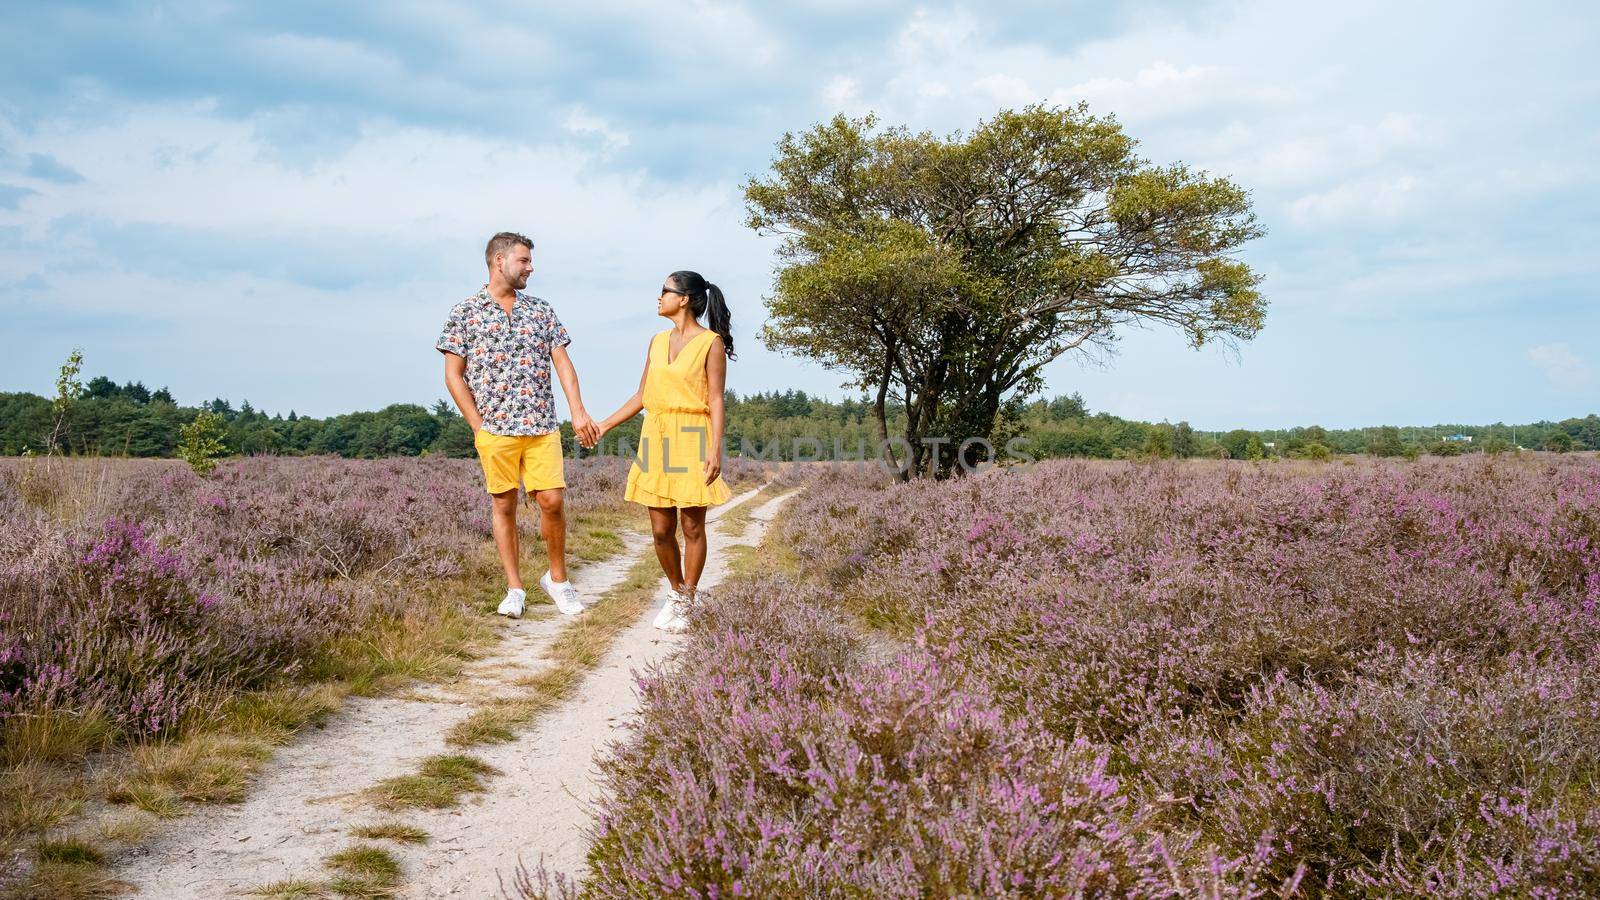 Zuiderheide National park Veluwe, purple pink heather in bloom, blooming heater on the Veluwe by Laren Hilversum Netherlands, blooming heather fields. Couple men and women walking at the countryside